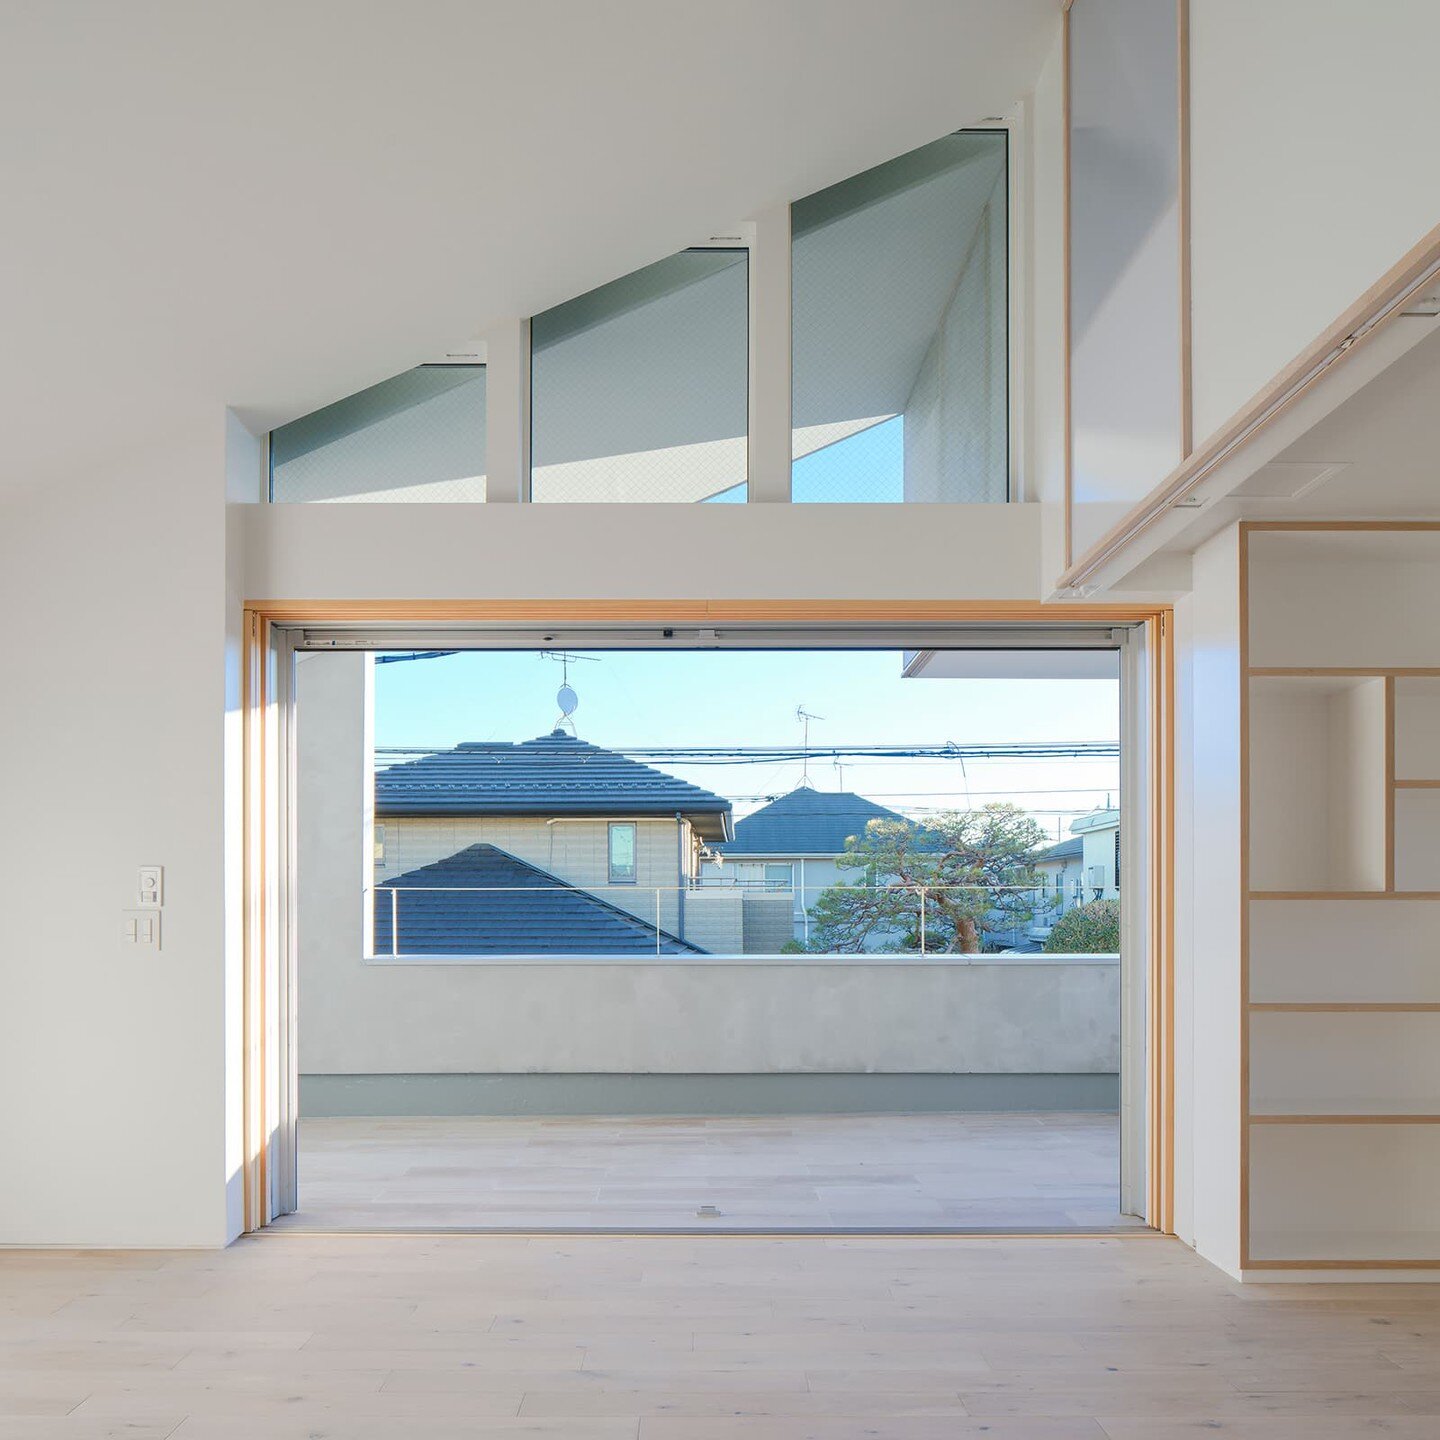 Recently completed project: Ogikubo House
-
site : Suginami-ku, Tokyo, Japan
year complete : 2024
usage : private house
site area : 91 m2
gross floor area : 112 m2
structure : timber
architect : @kominoru
contractor : KRONOS
-
敷地 : 東京都杉並区
竣工 : 2024
用